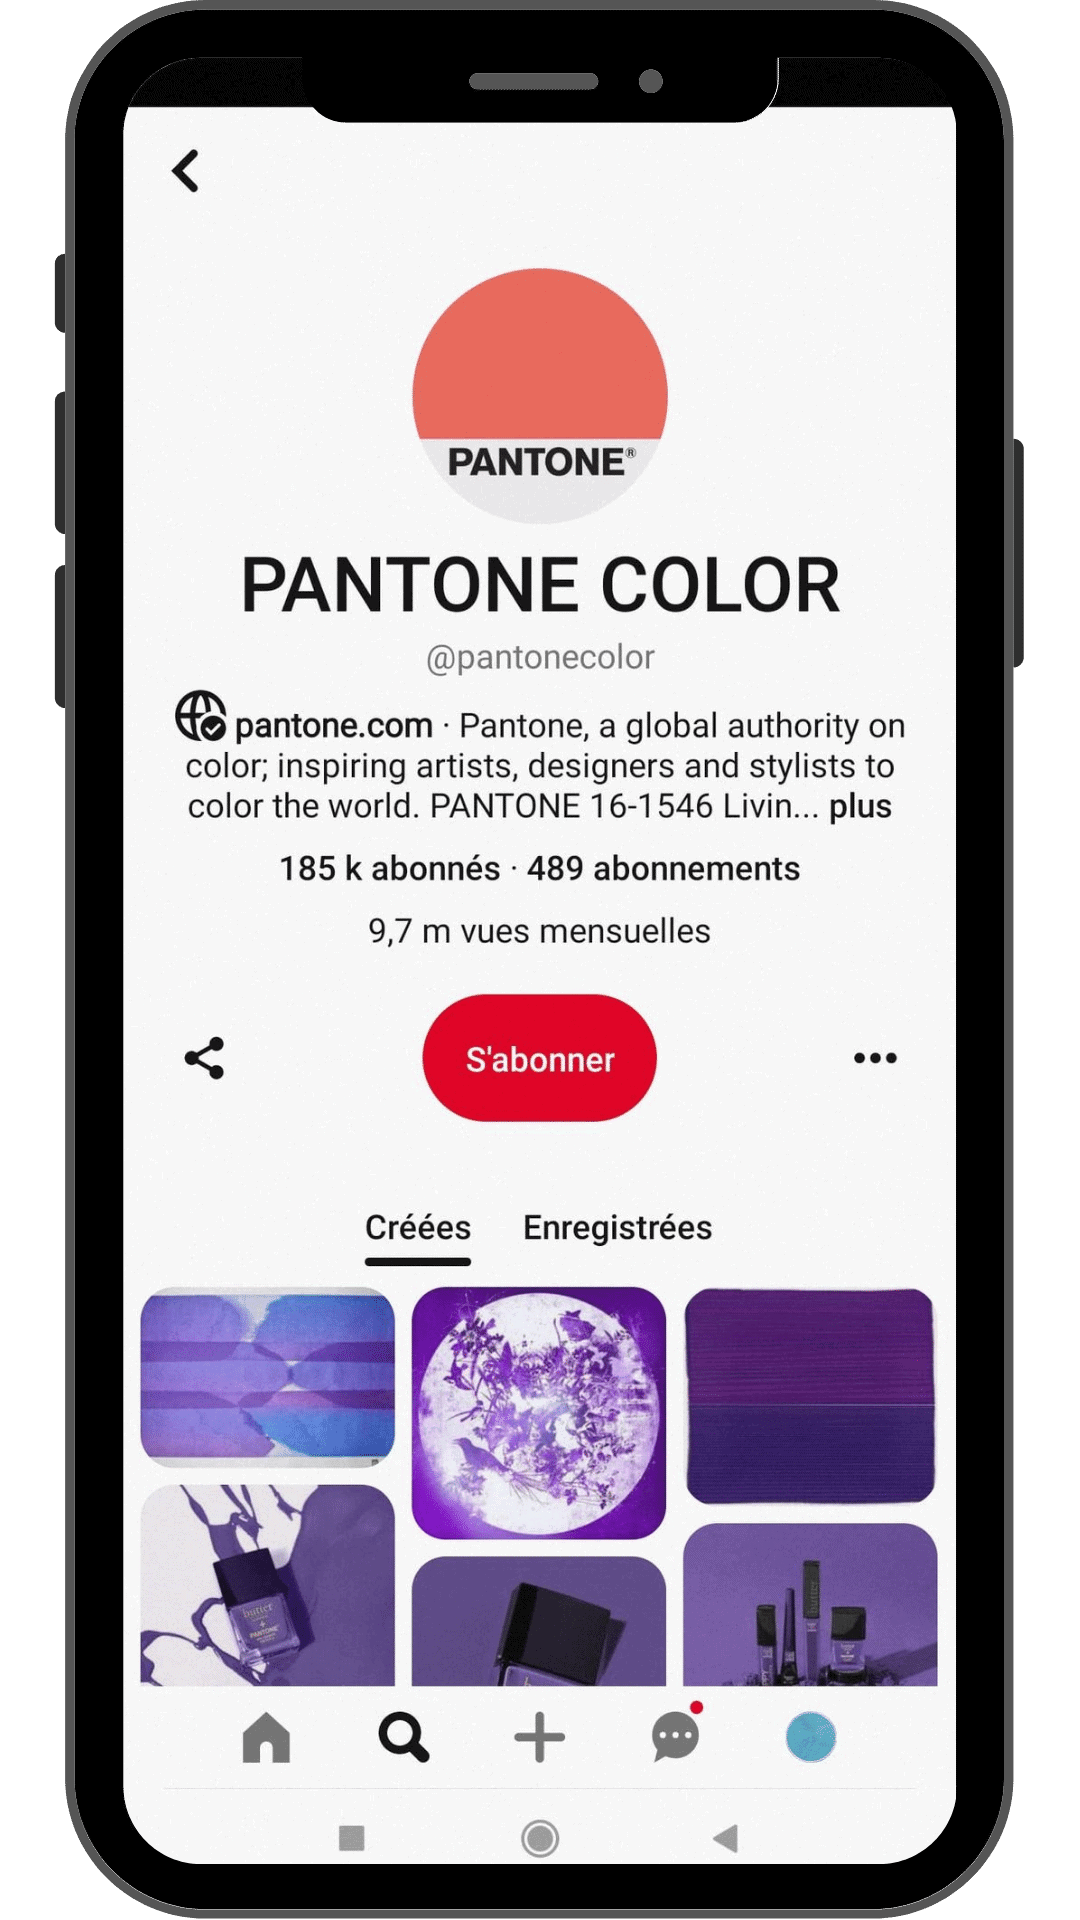 PANTONE COLOR @pantonecolor 0 pantone.com • Pantone, a global authority on color; inspiring artists, designers and stylists to color the world. PANTONE 16-1546 Livin... plus